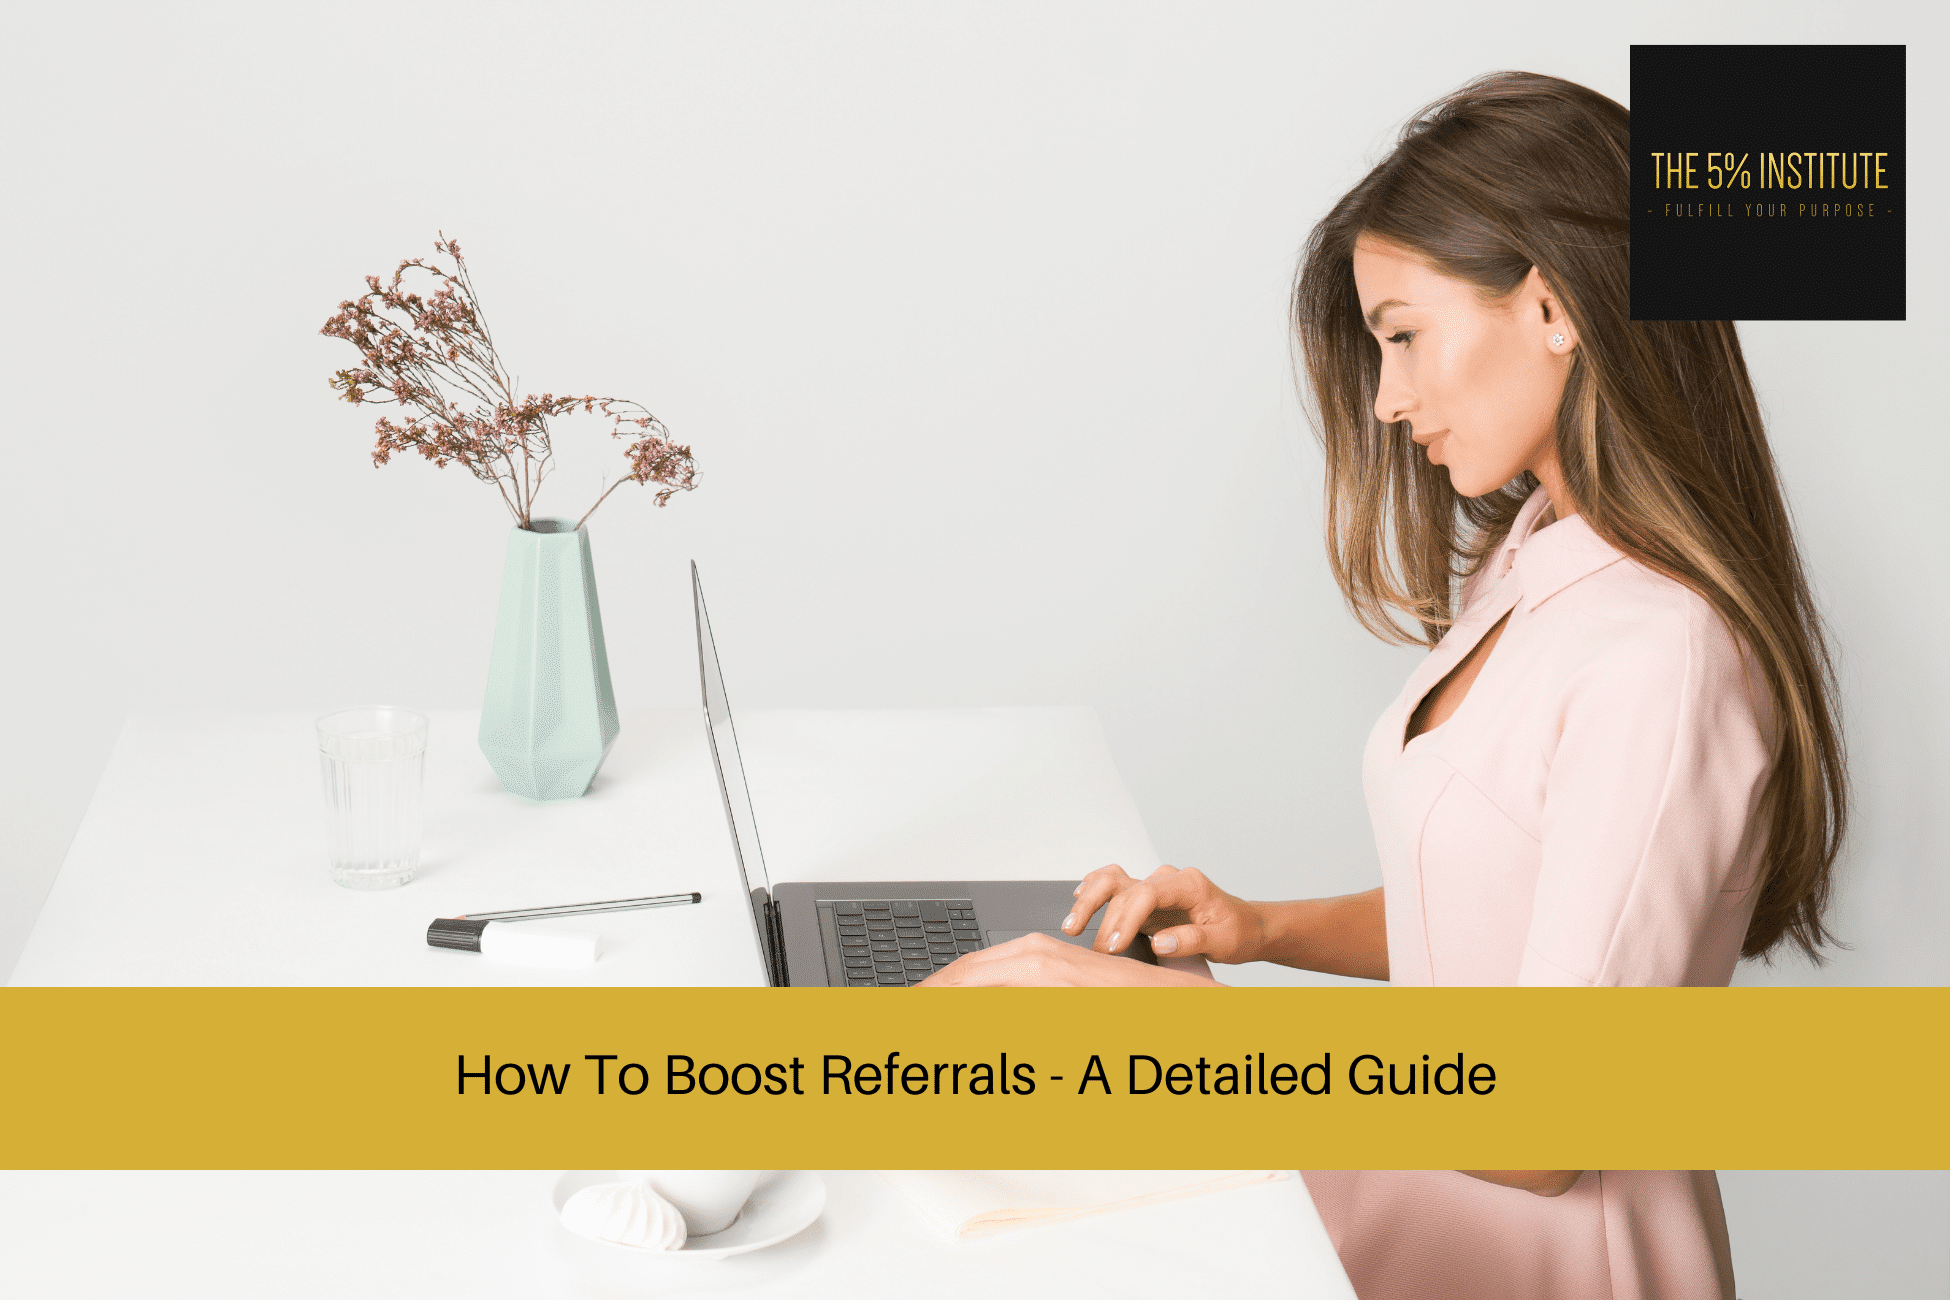 How To Boost Referrals